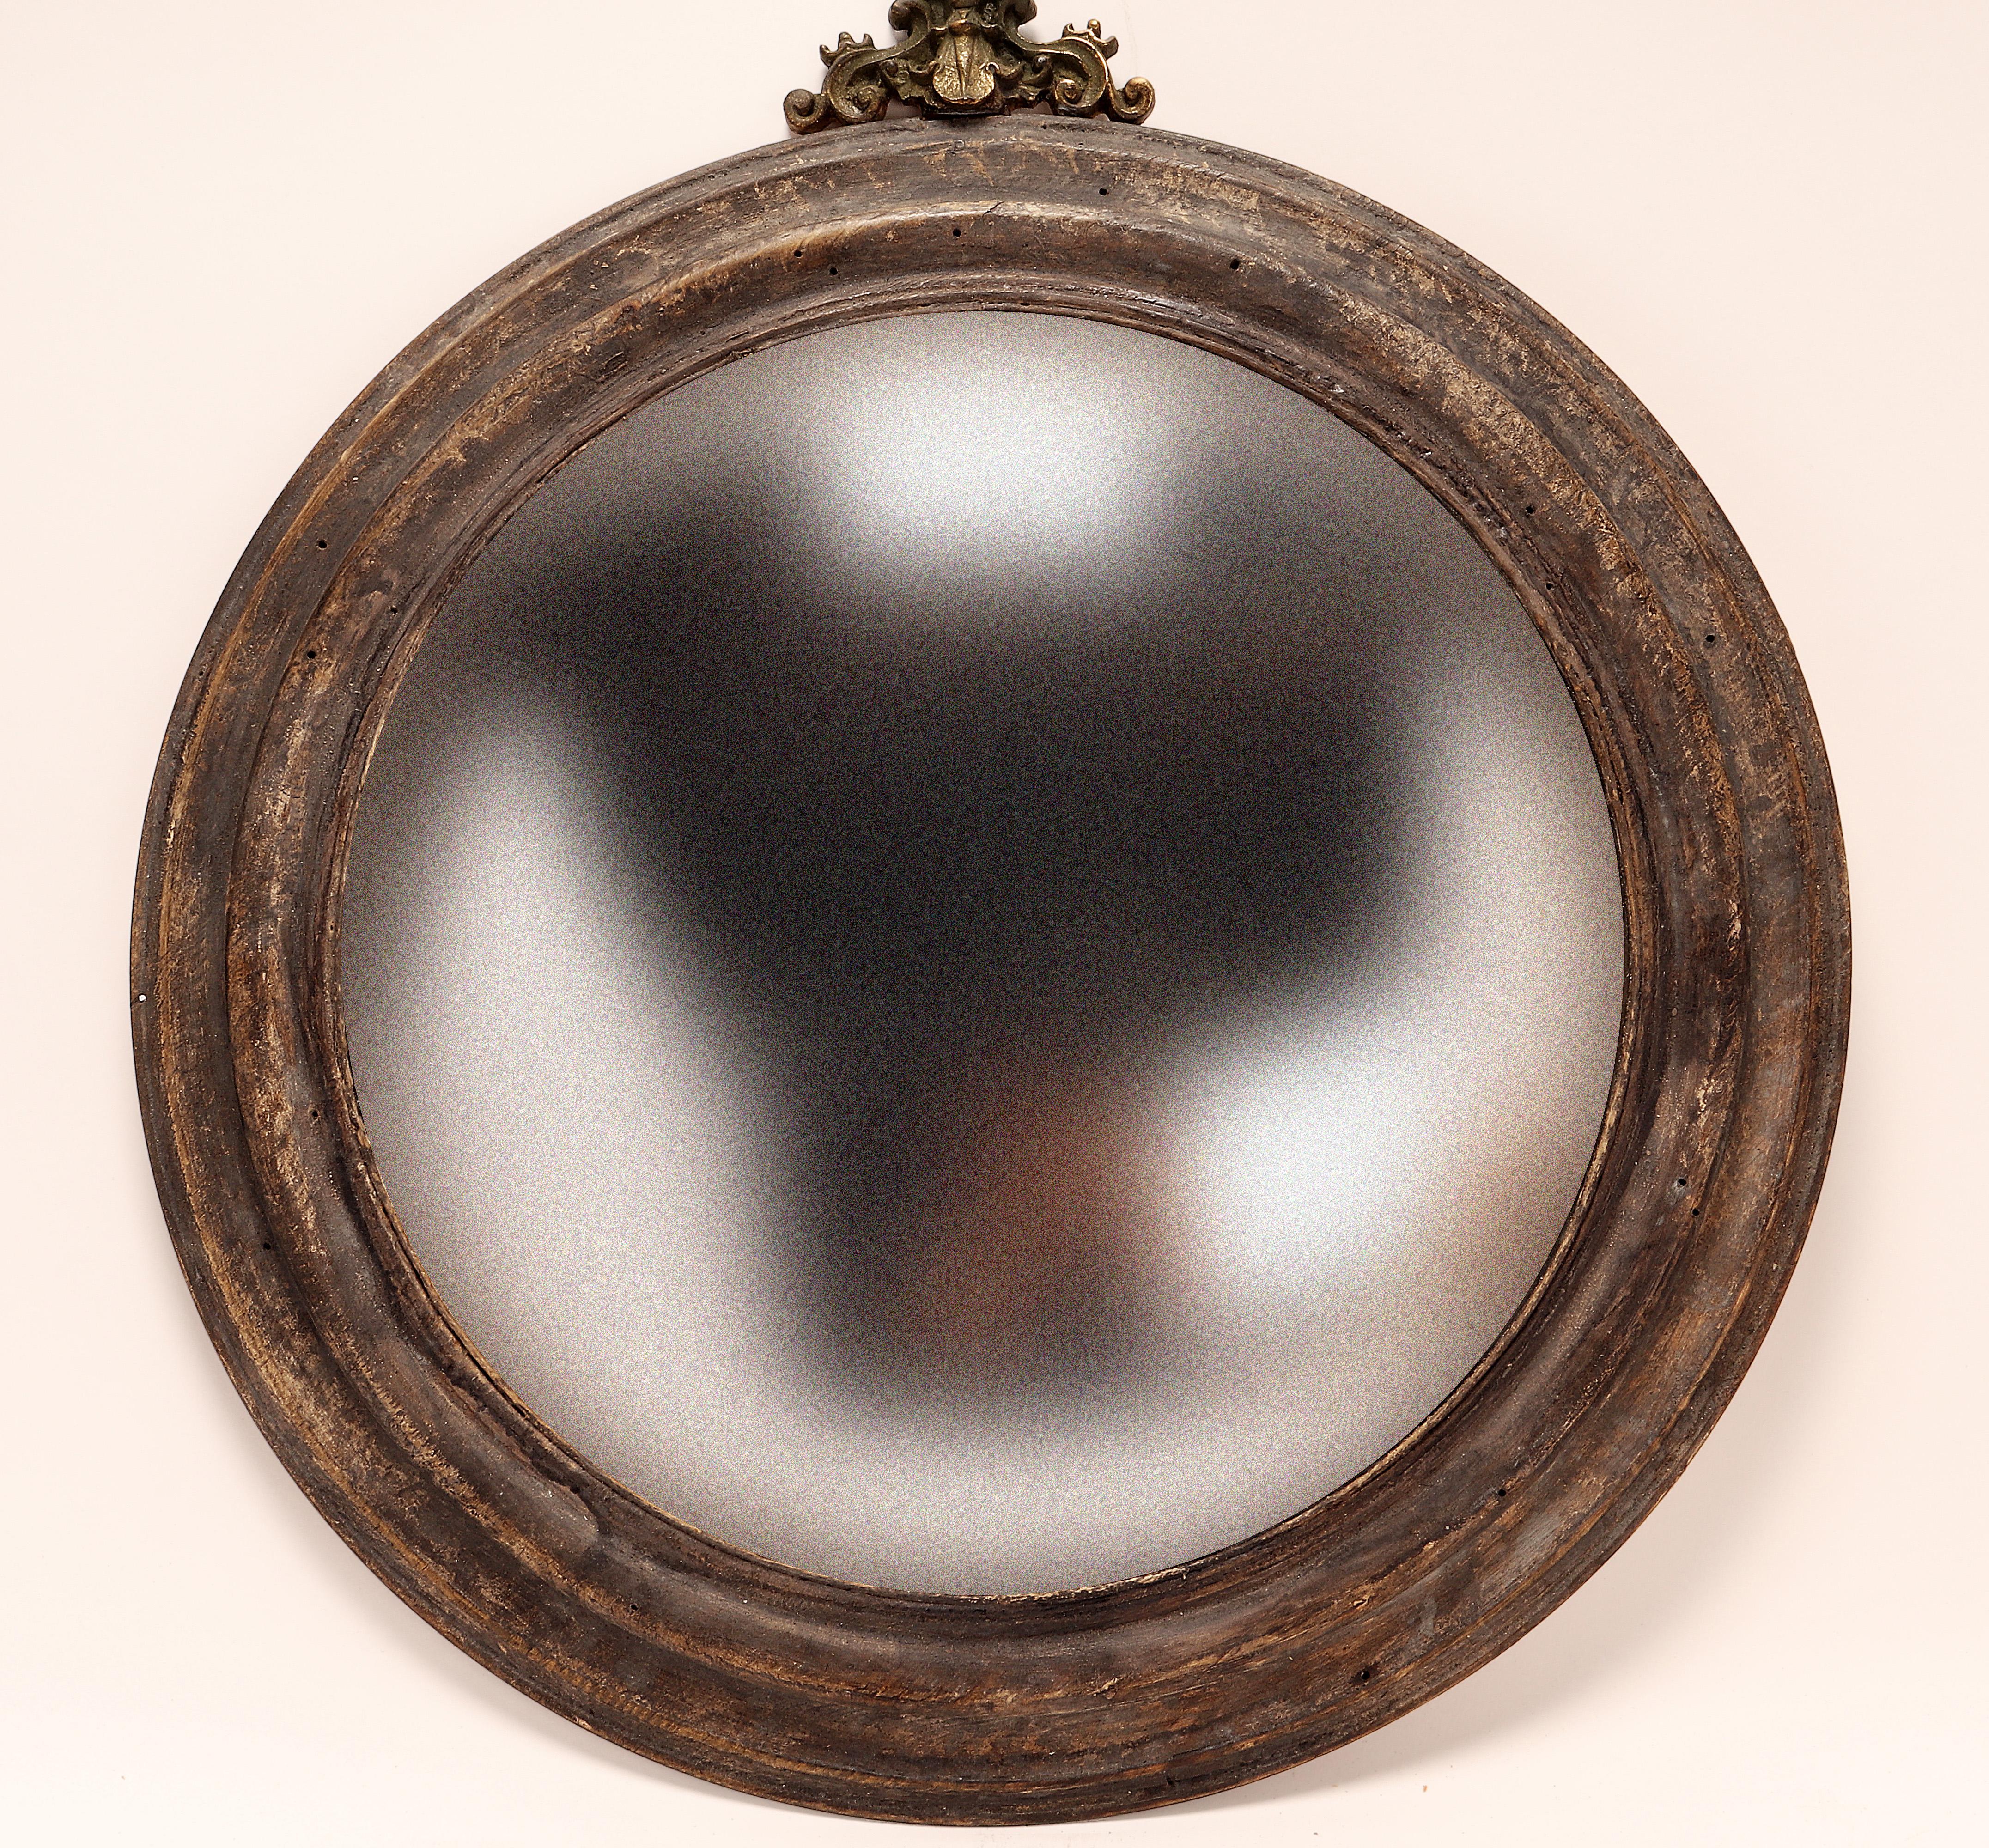 A Wunderkammer hanging round convex mirrors with gray wooden frame. Italy circa 1870.